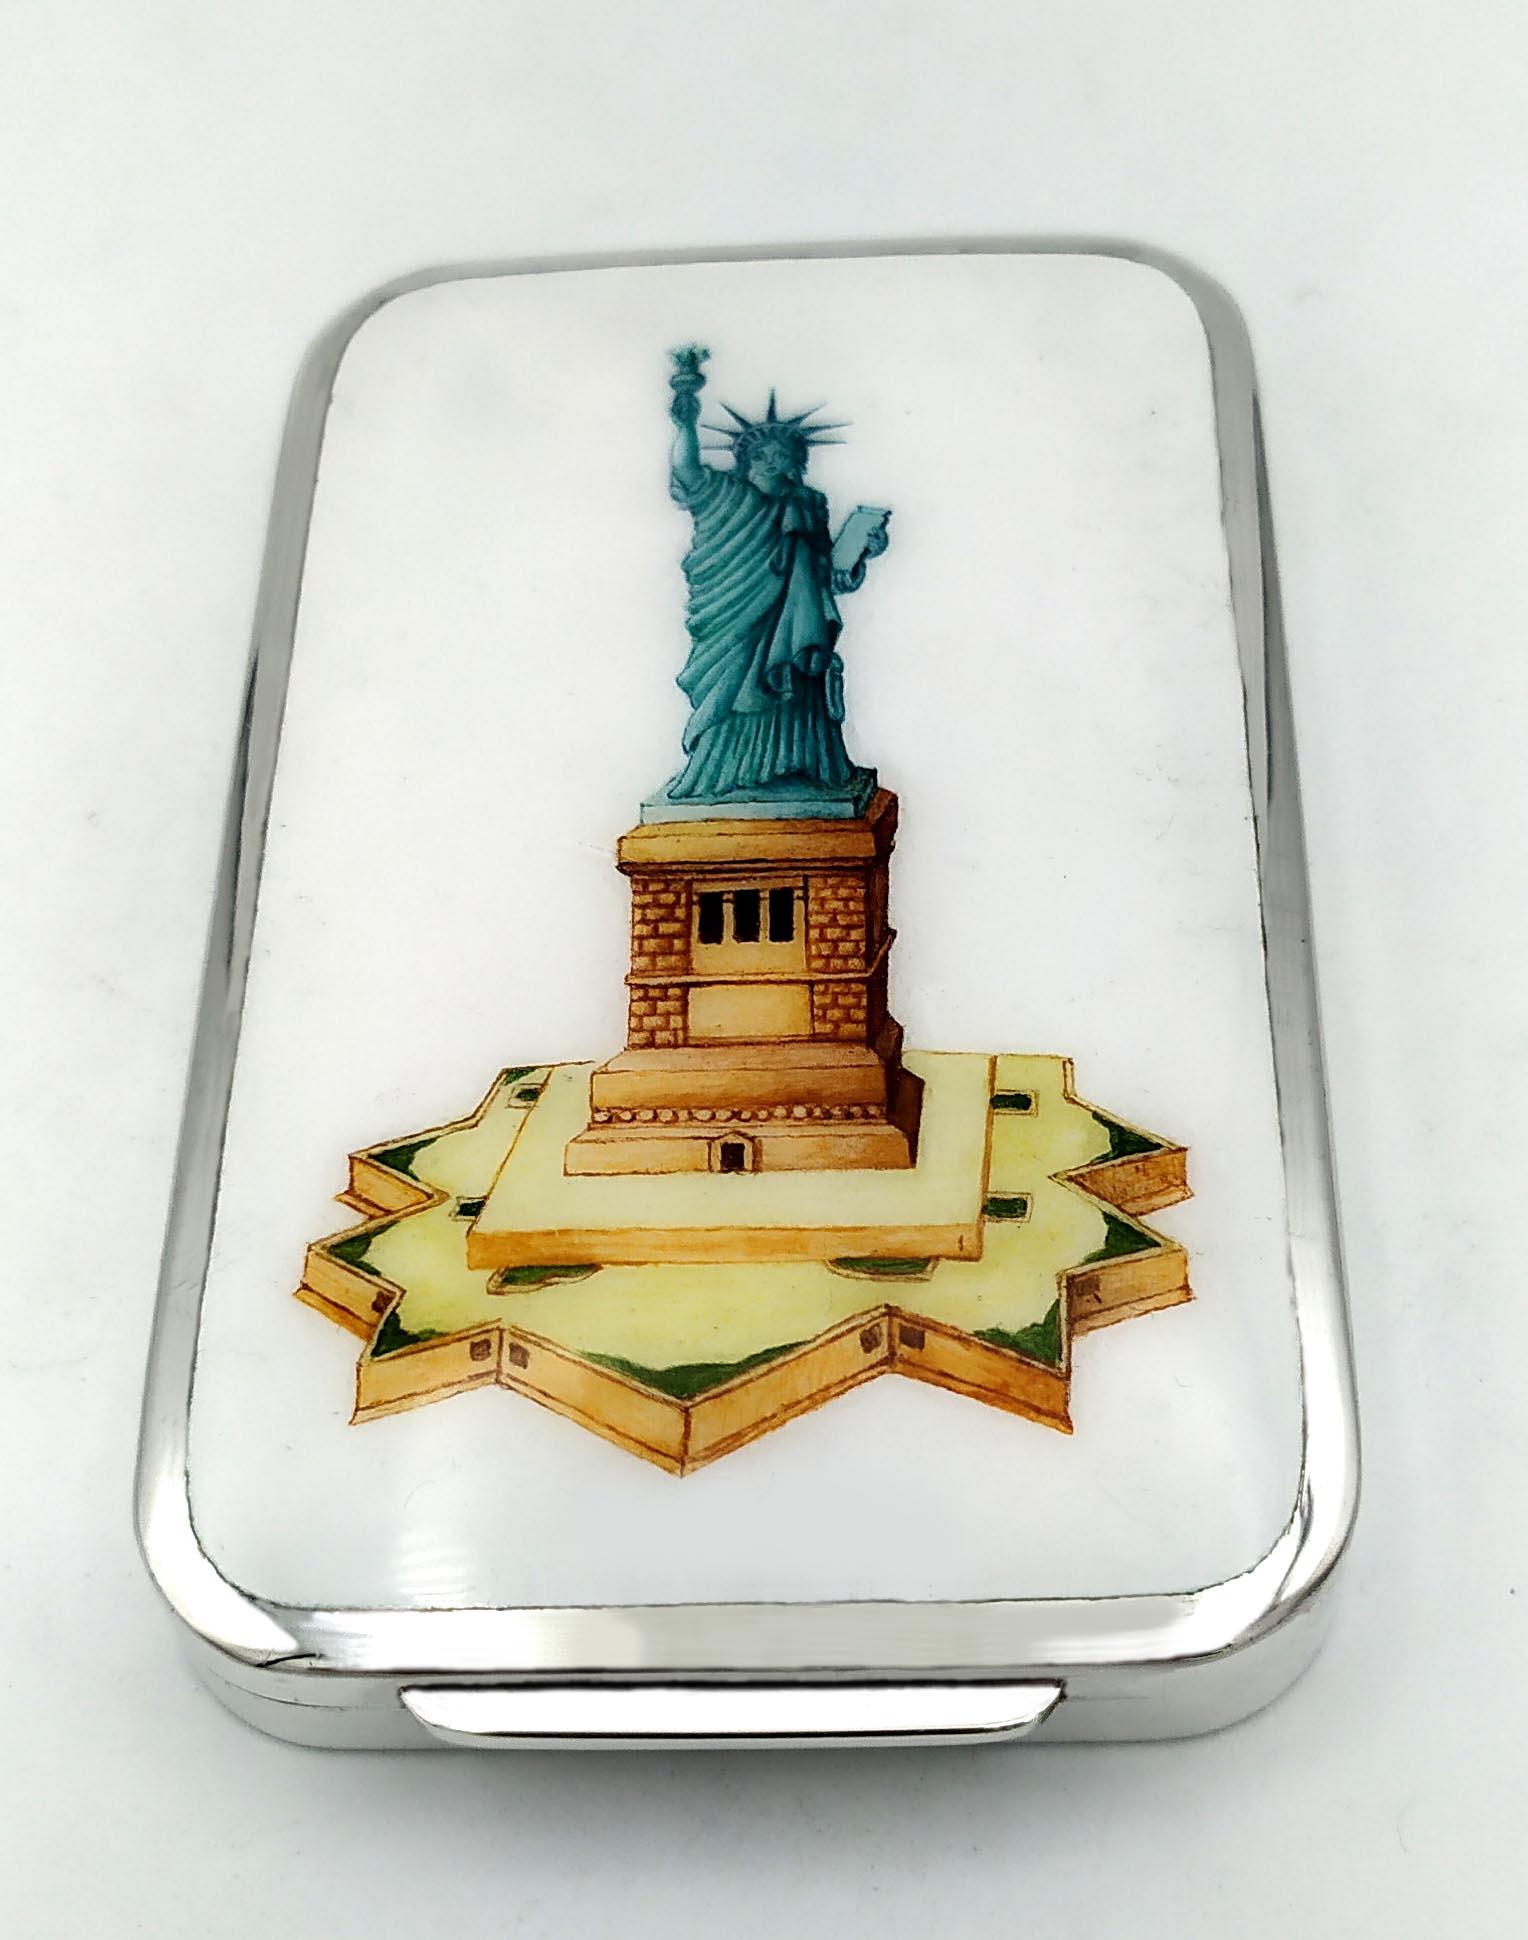 Rectangular tabletop cigarette case with rounded corners in 925/1000 sterling silver with fine hand-painted fire-enamelled miniature depicting the Statue of Liberty in New York. Dimensions cm. 5.7 x 9.2 x 1.2. Weight gr. 127. Designed by Giorgio